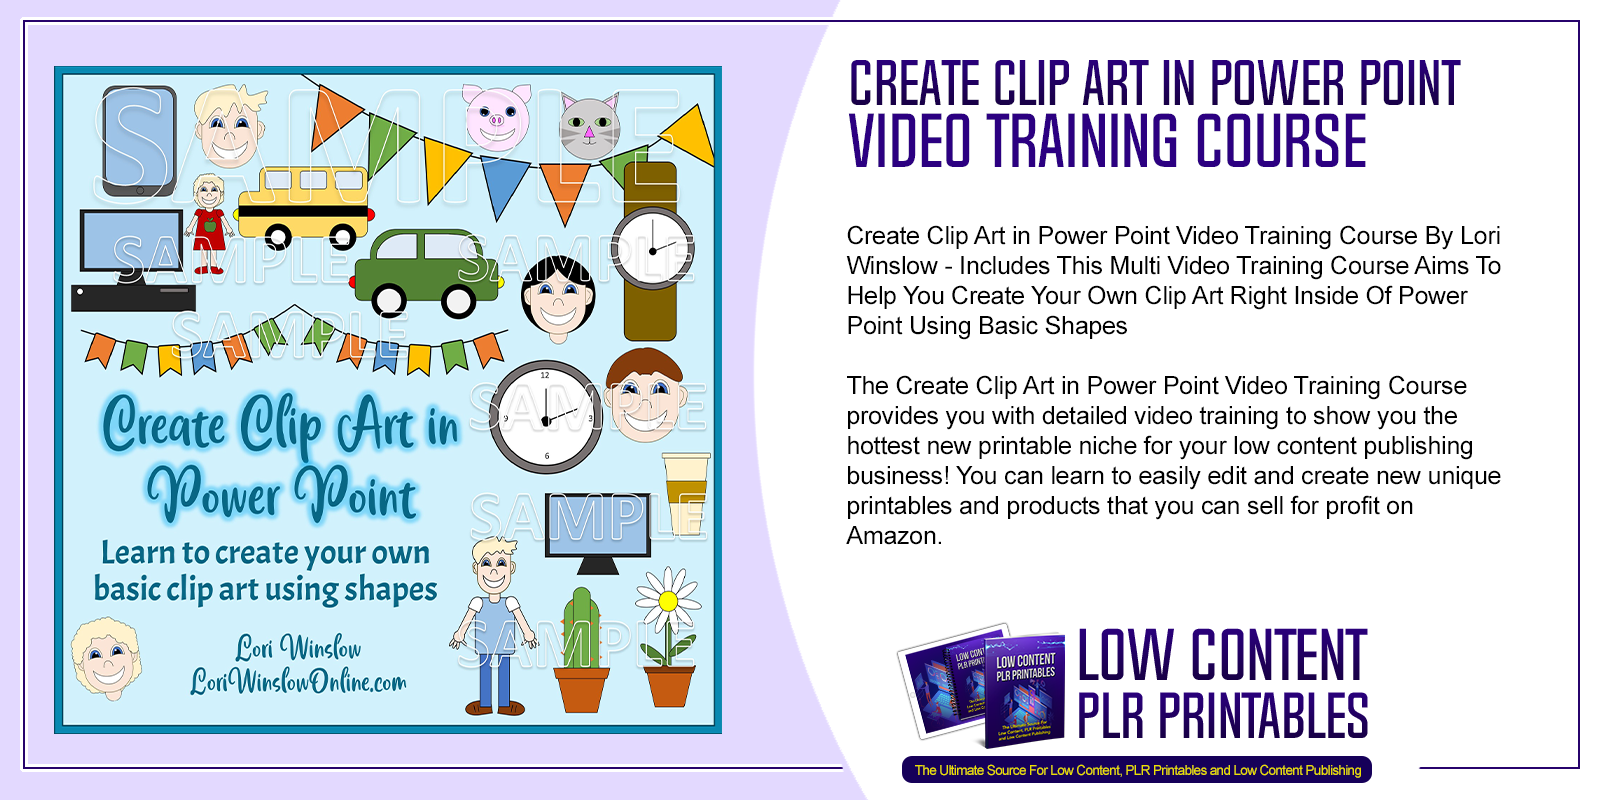 Create Clip Art in Power Point Video Training Course